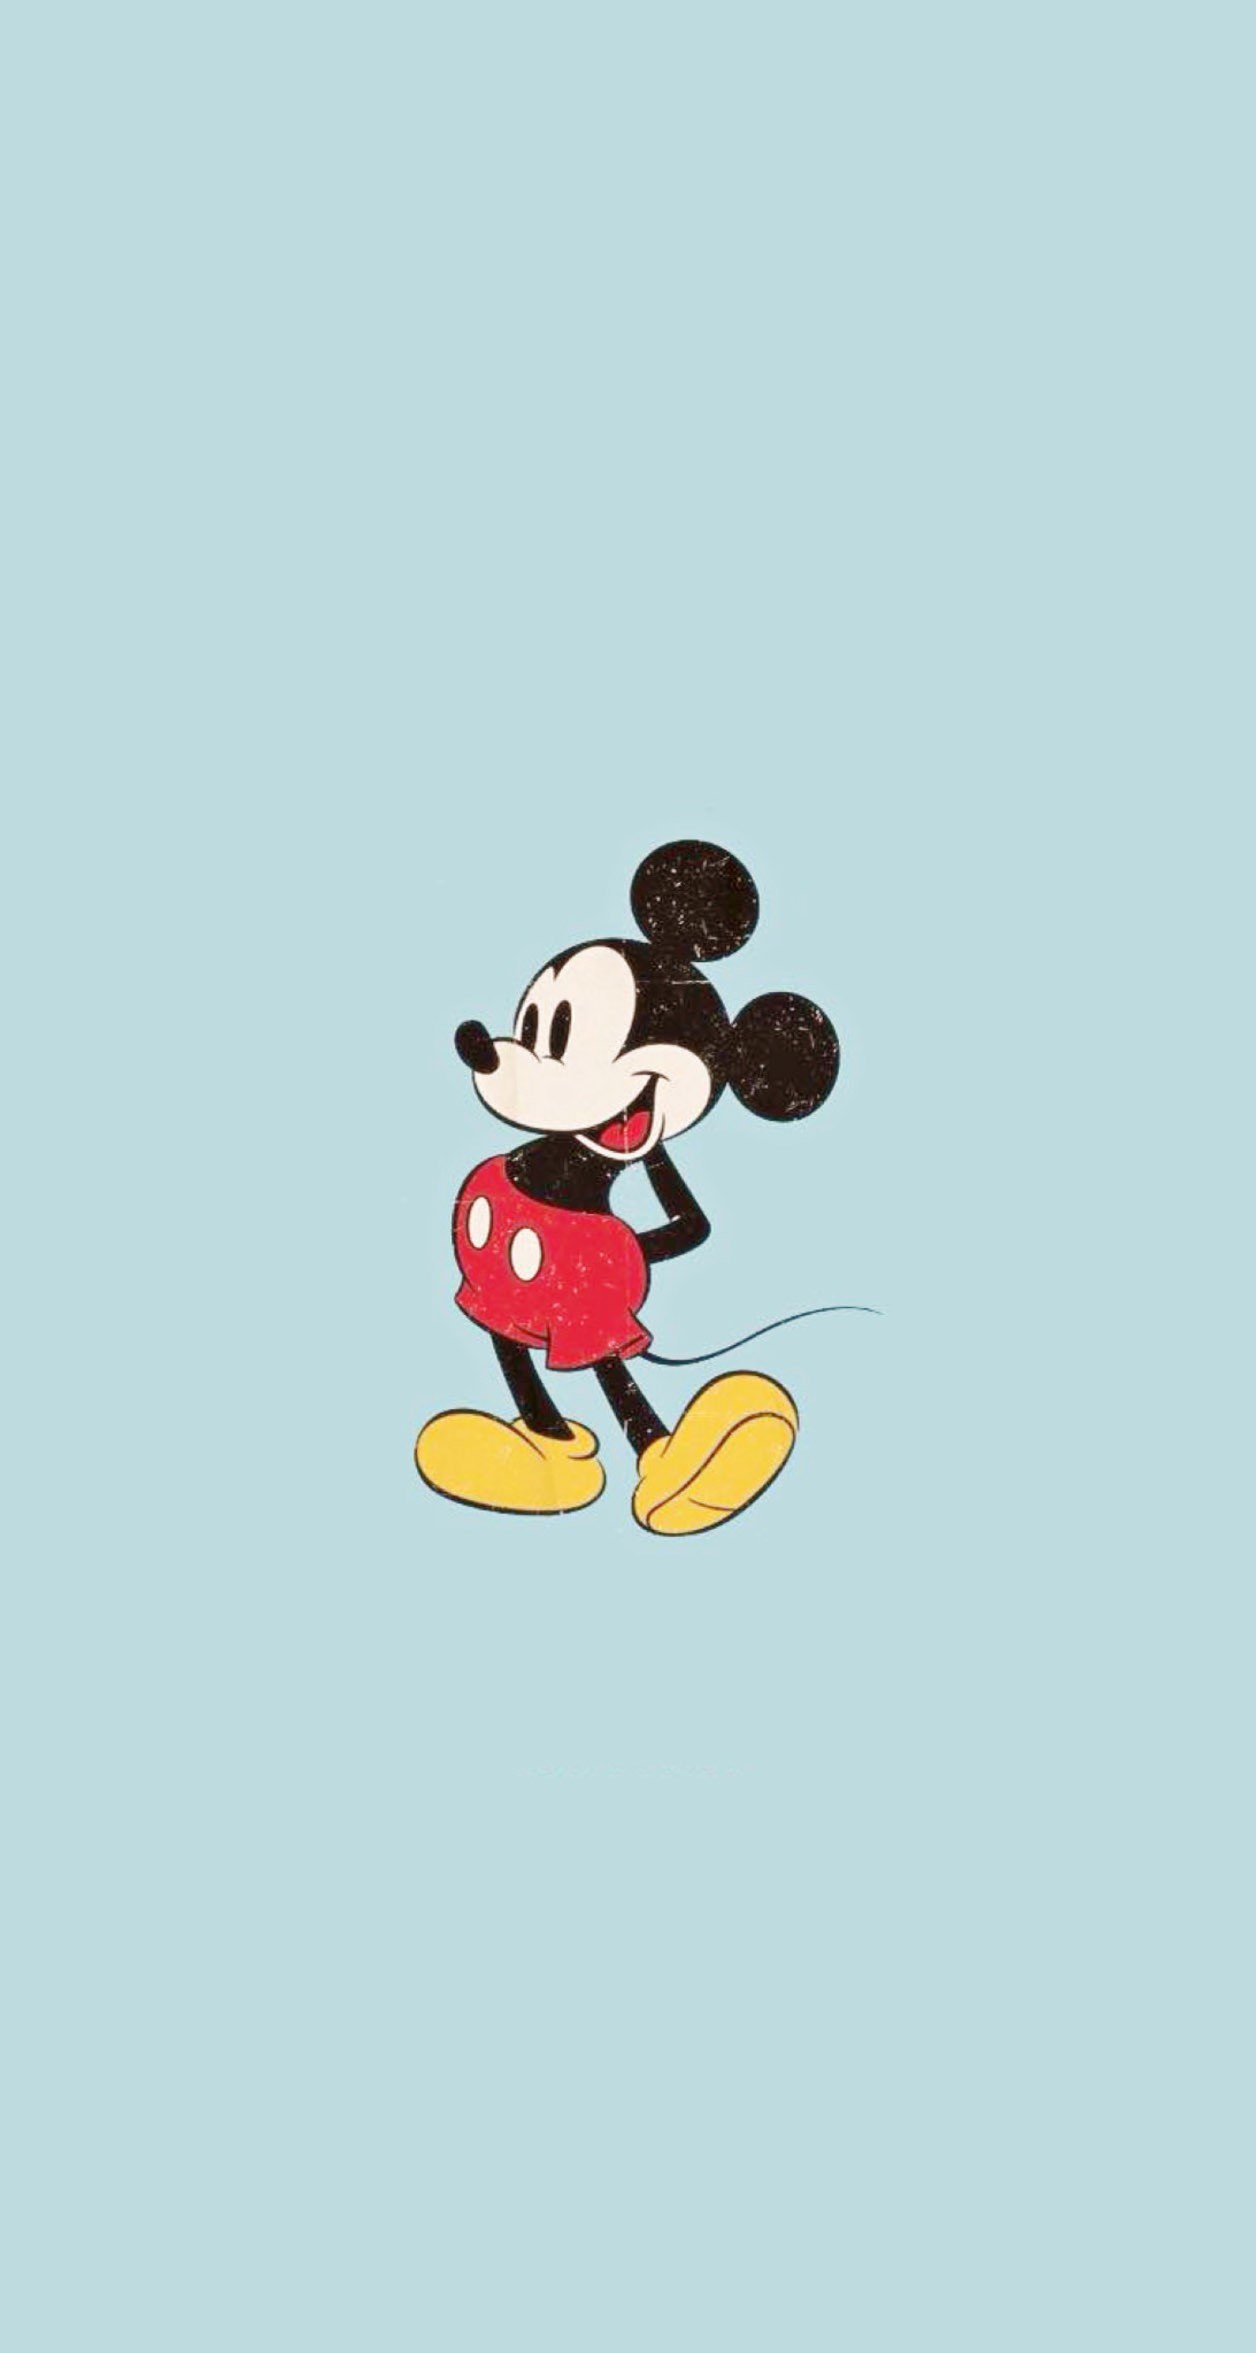 1256x2353 Mickey Mouse Phone Wallpaper | HD Wallpapers | Pinterest | Mickey mouse  wallpaper, Hd wallpaper and Wallpaper